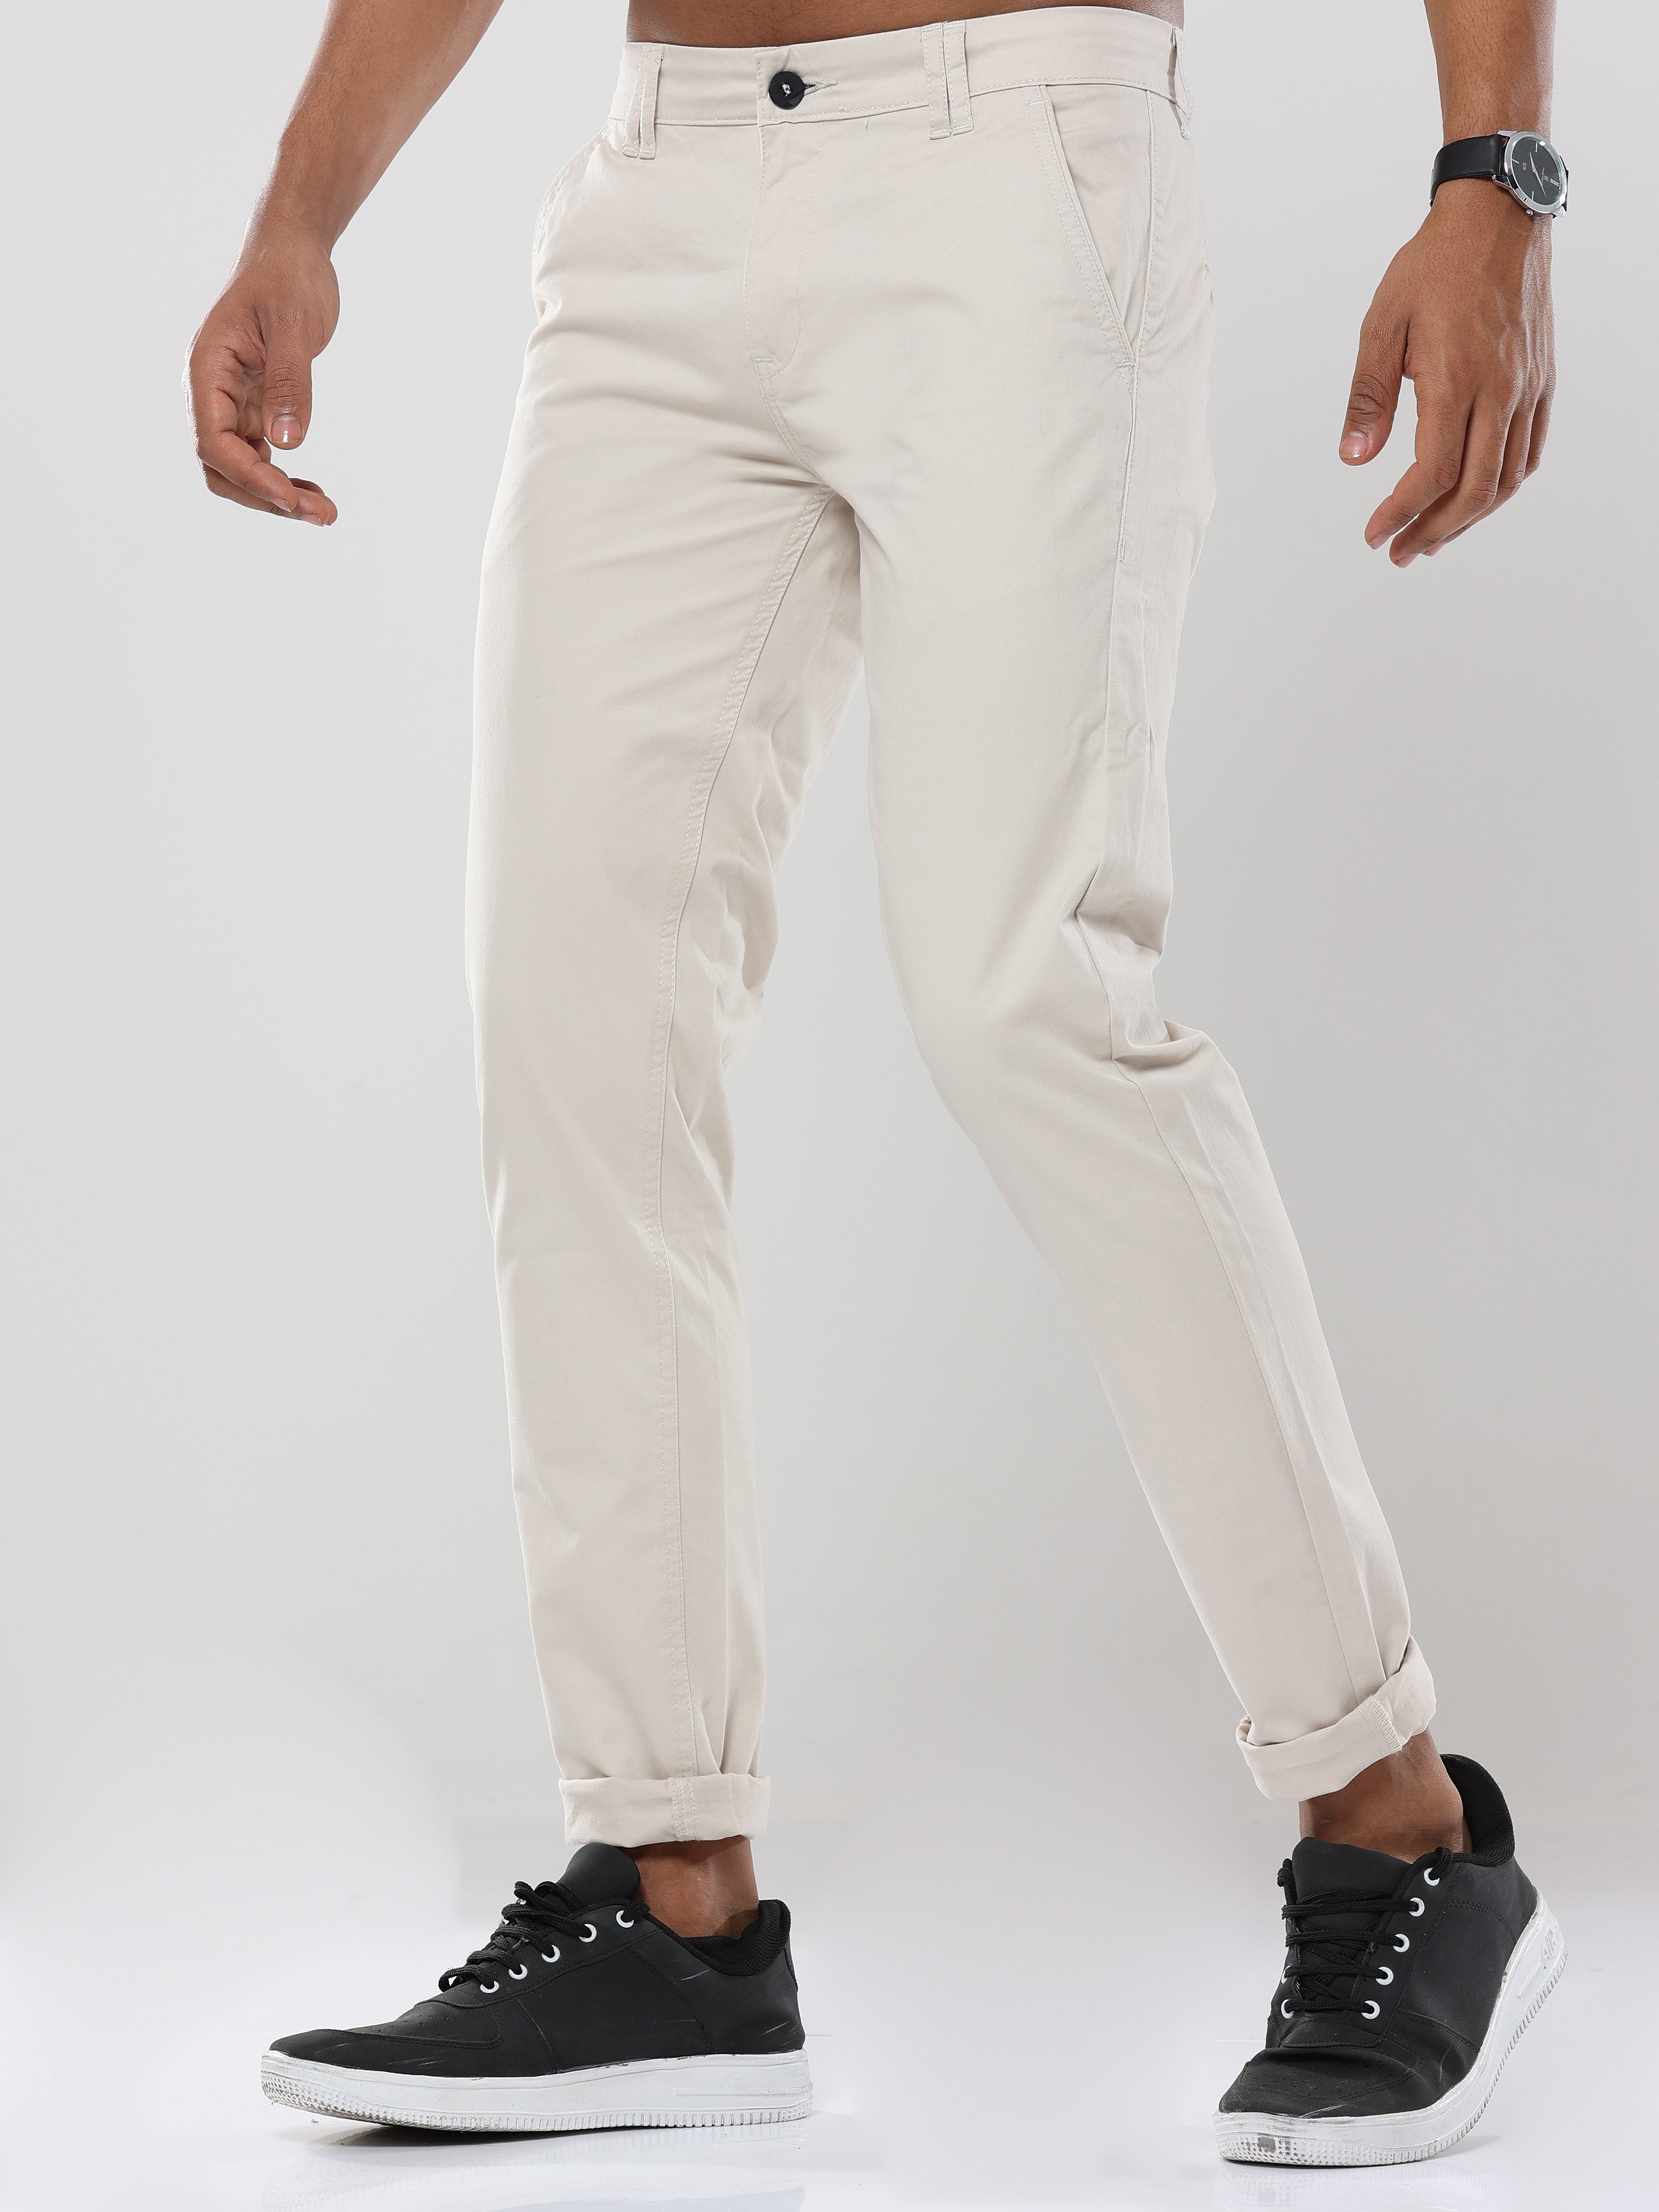 Buy Silvery White Chinos for Men Online in India at Beyoung